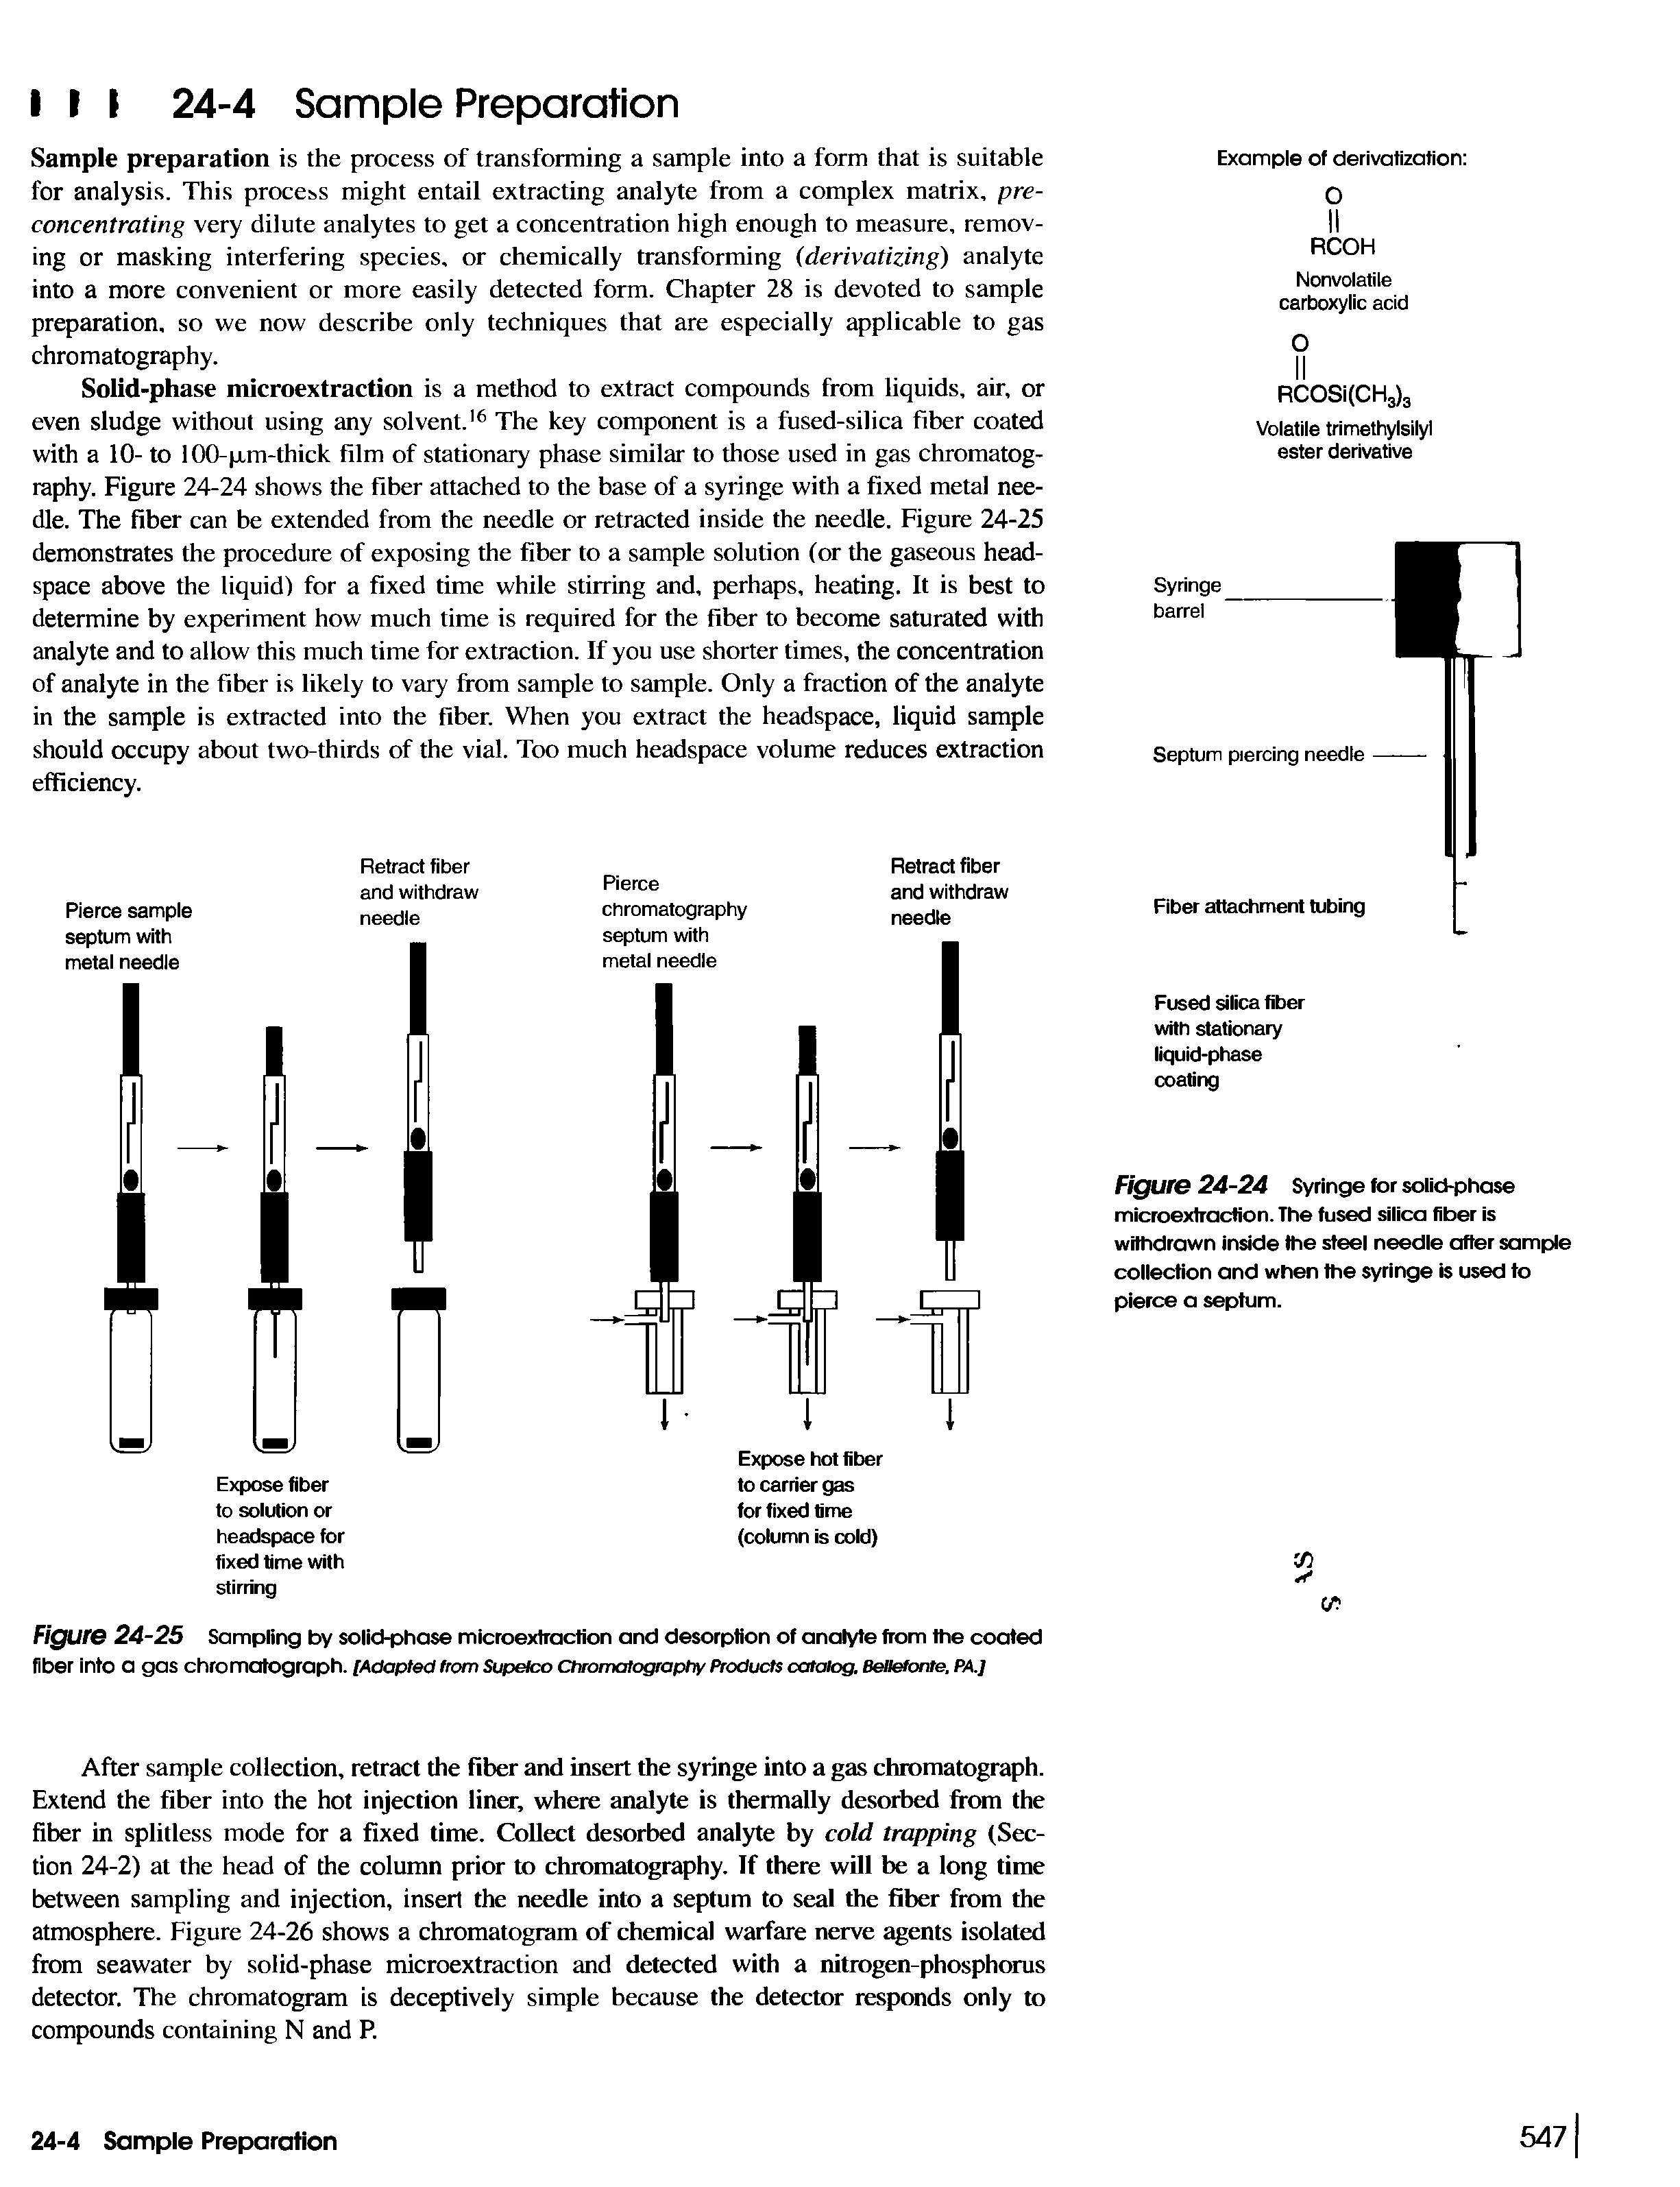 Figure 24-25 Sampling by solid-phase microextraction and desorption of analyte from the coated fiber into a gas chromatograph. [Adapted from Supetco Chromatography Products catalog. Belletonte. PA.]...